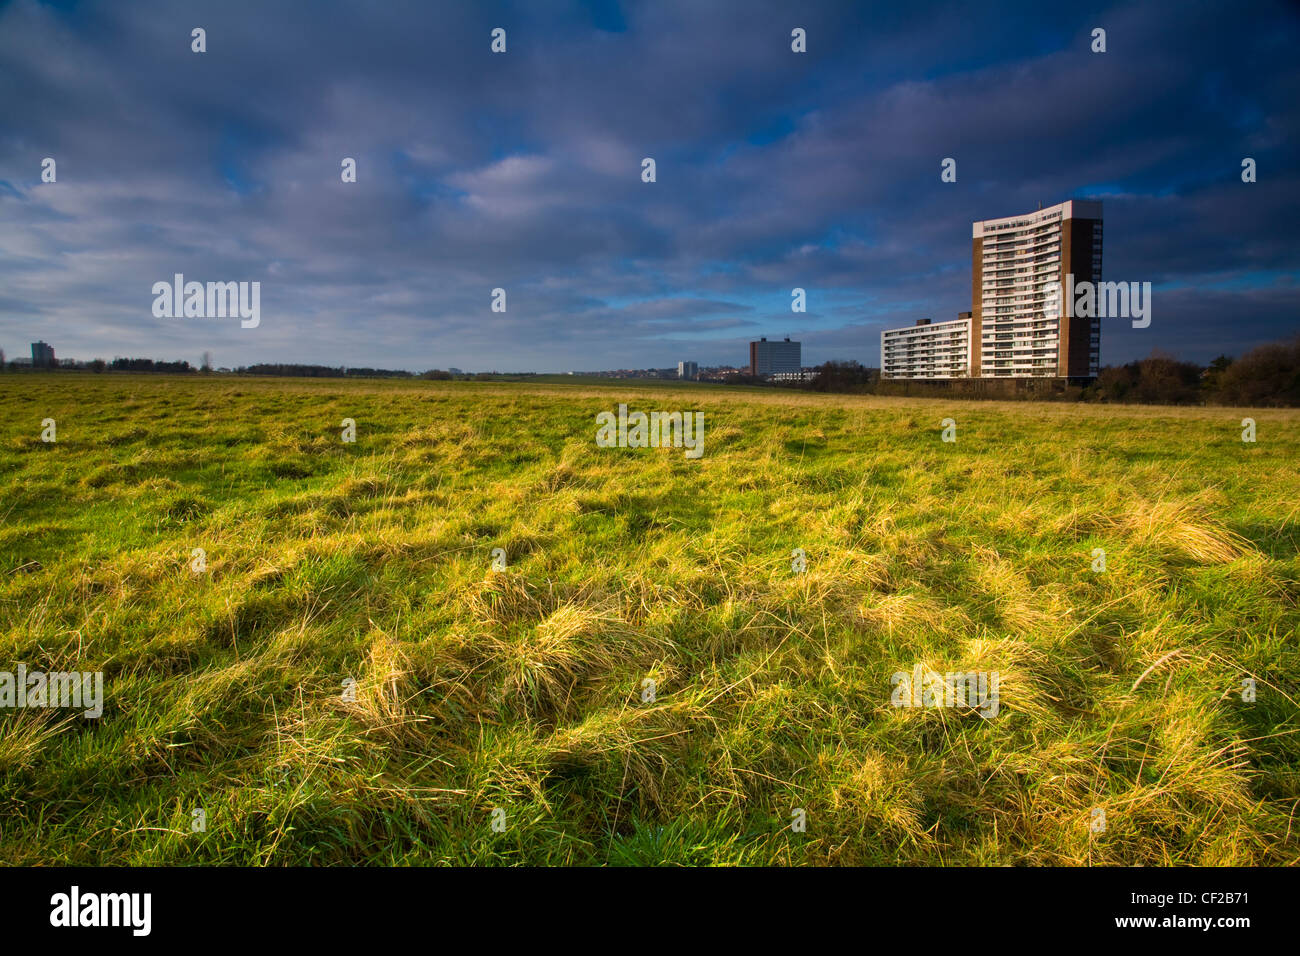 Nuns Moor with the high rise flats of Kenton in the distance. Stock Photo